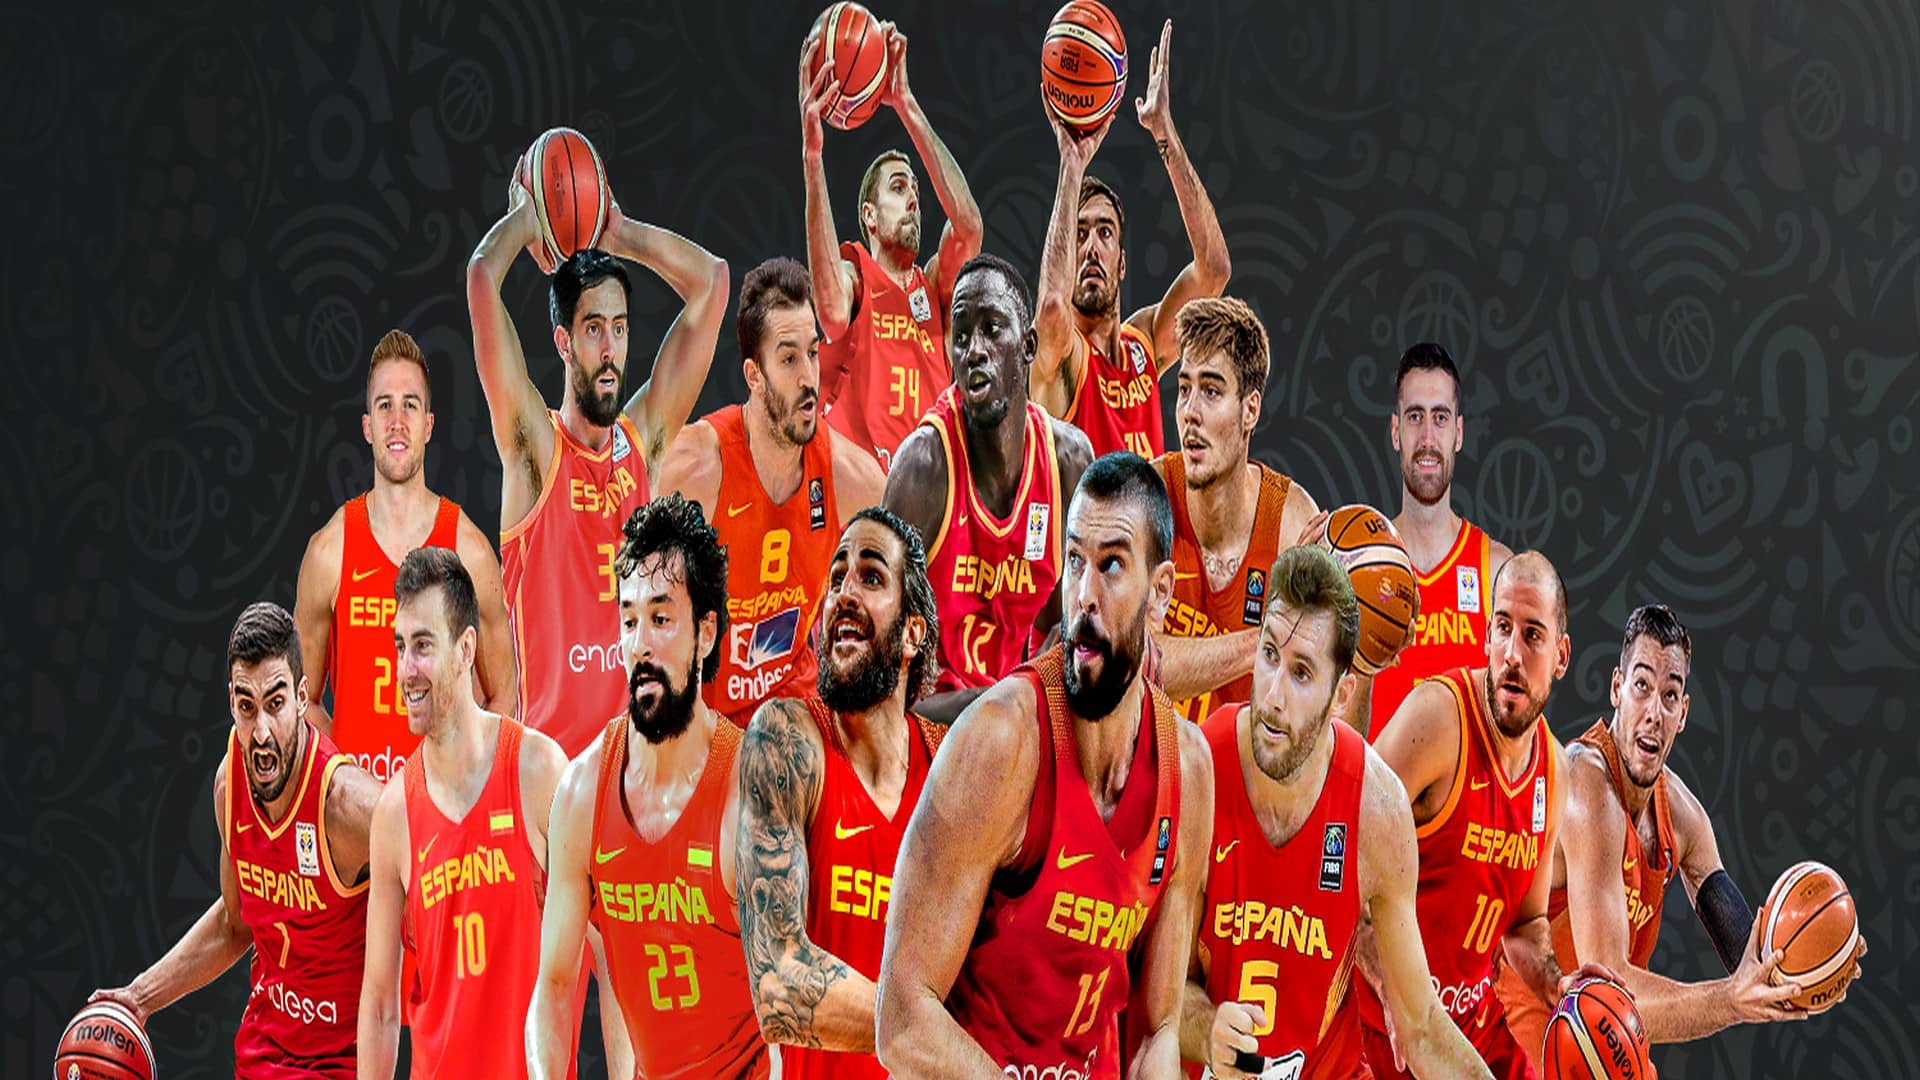 The best basketball teams in the world